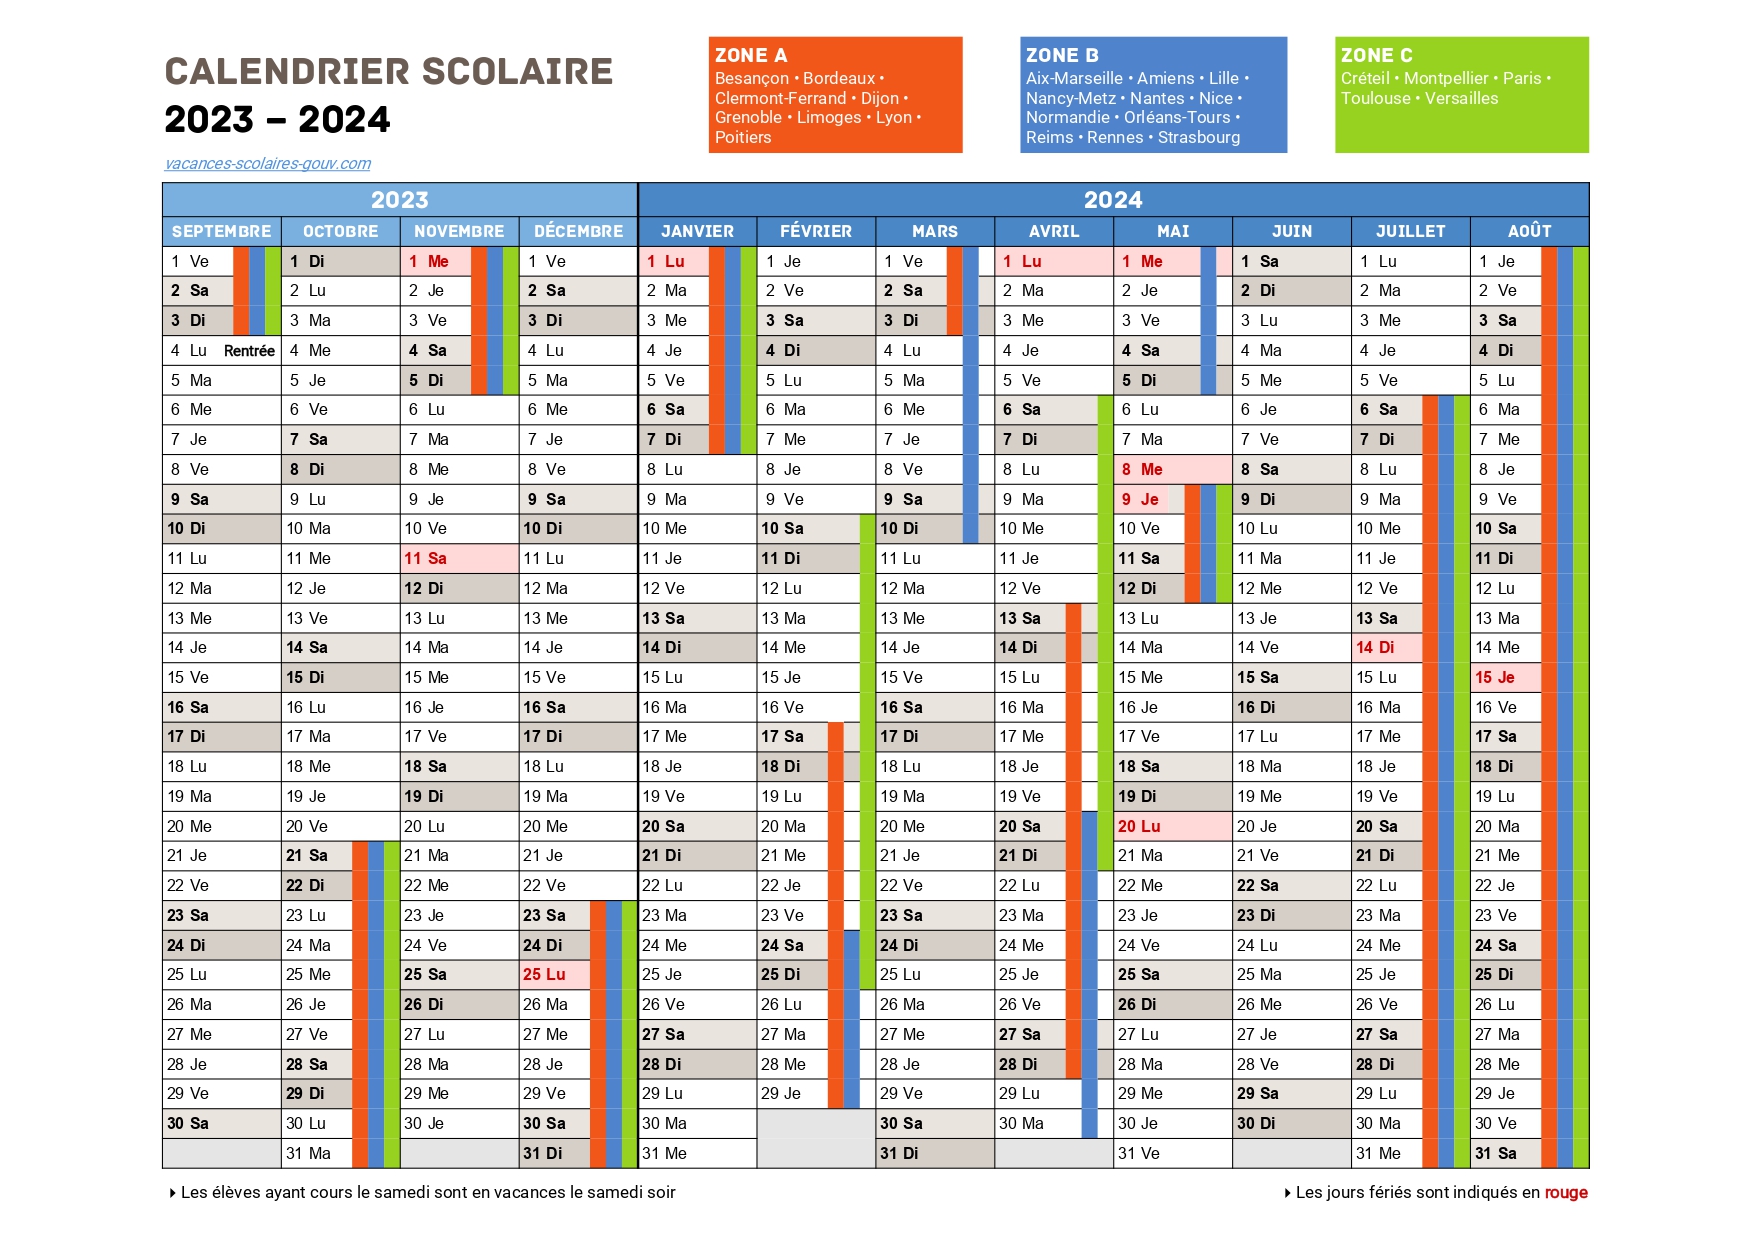 calendrier-scolaire-2023-2024_page-0001.jpg